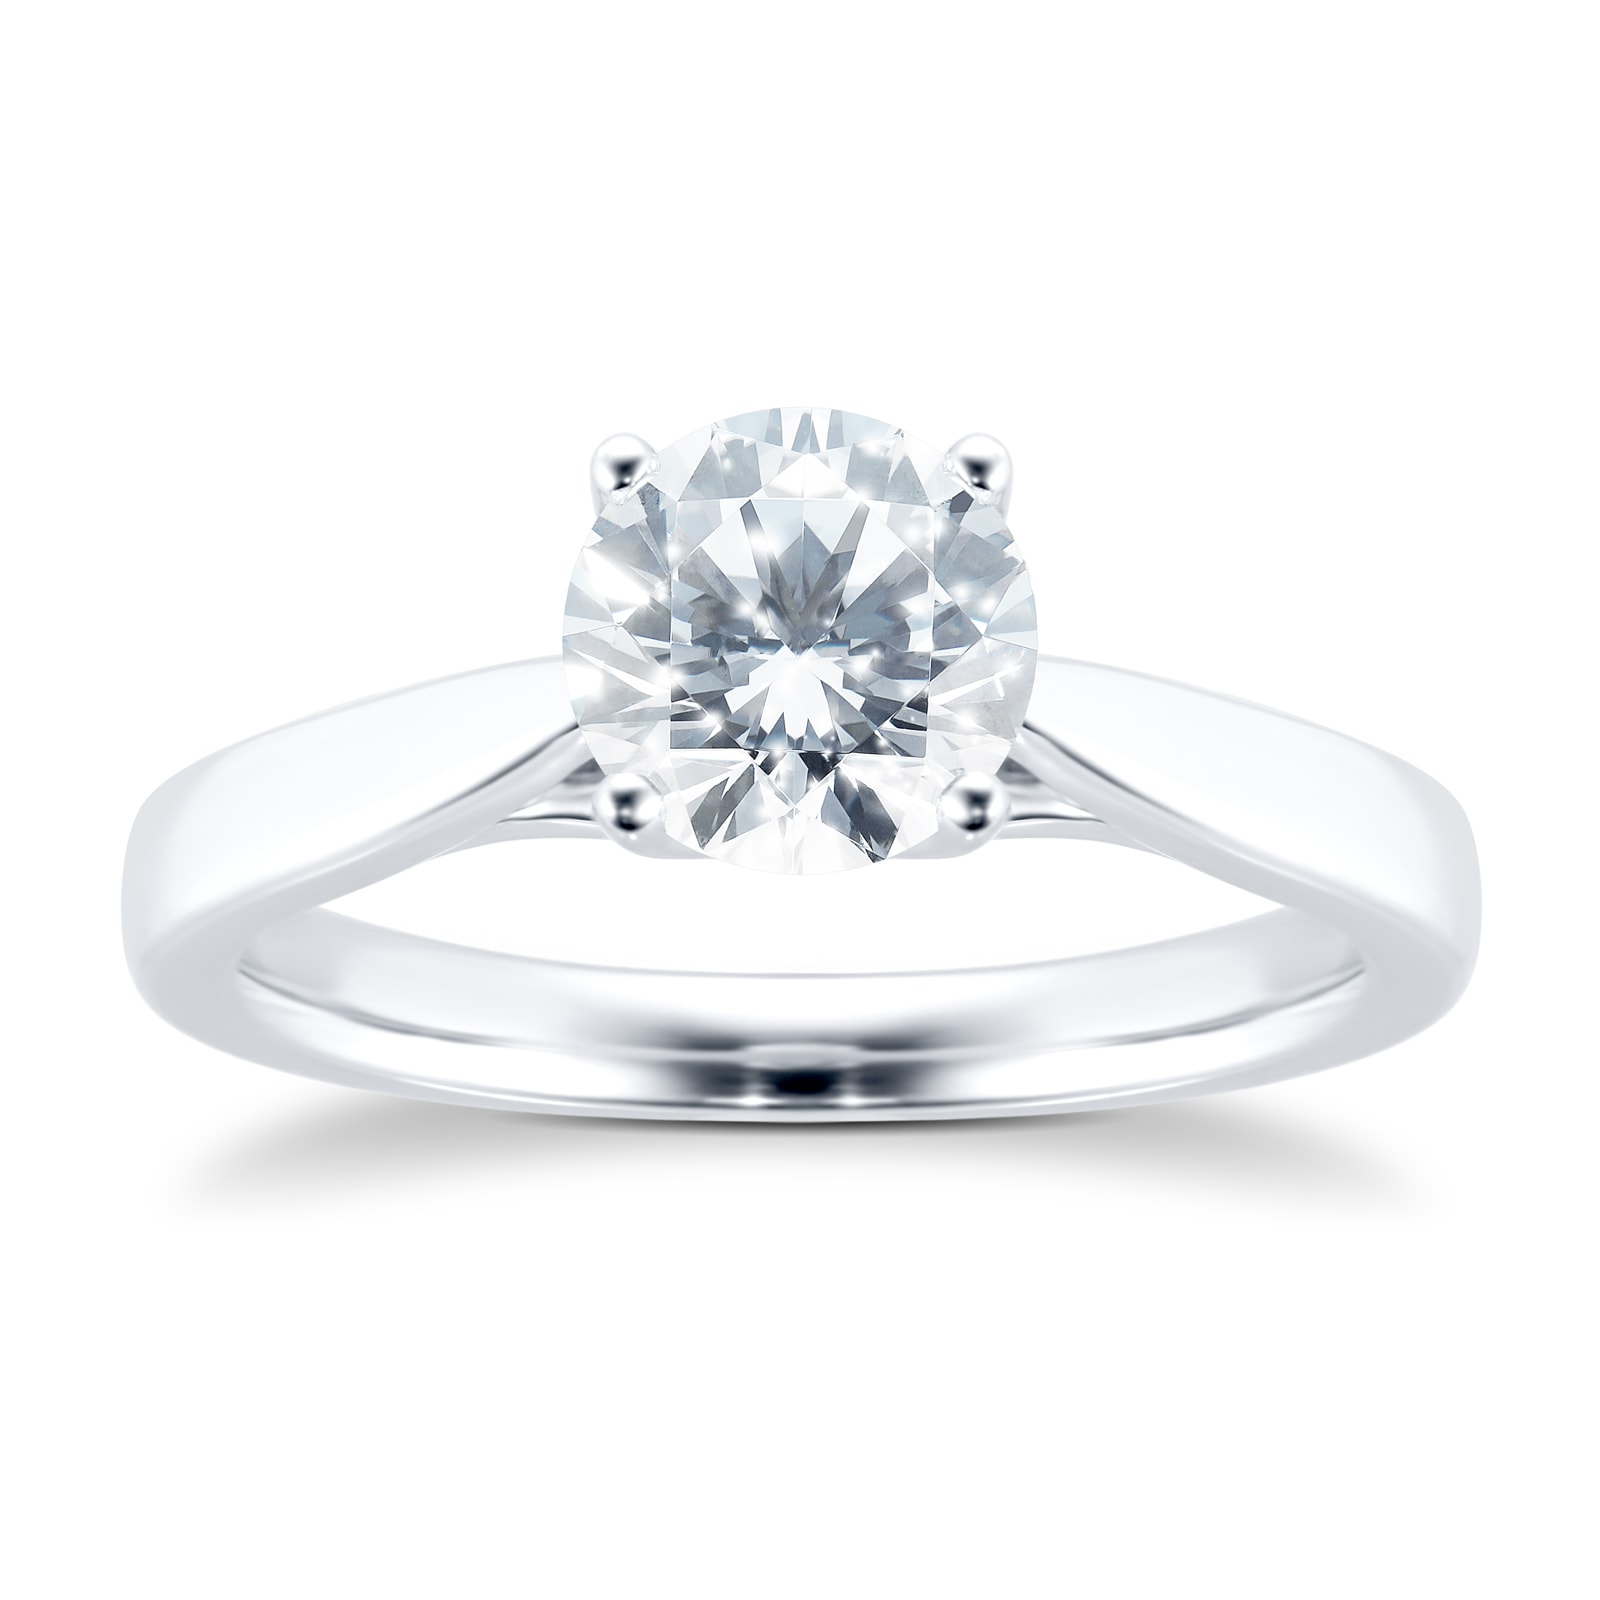 Platinum 1.50cttw Goldsmiths Brightest Diamond Solitaire Engagement Ring - Ring Size O